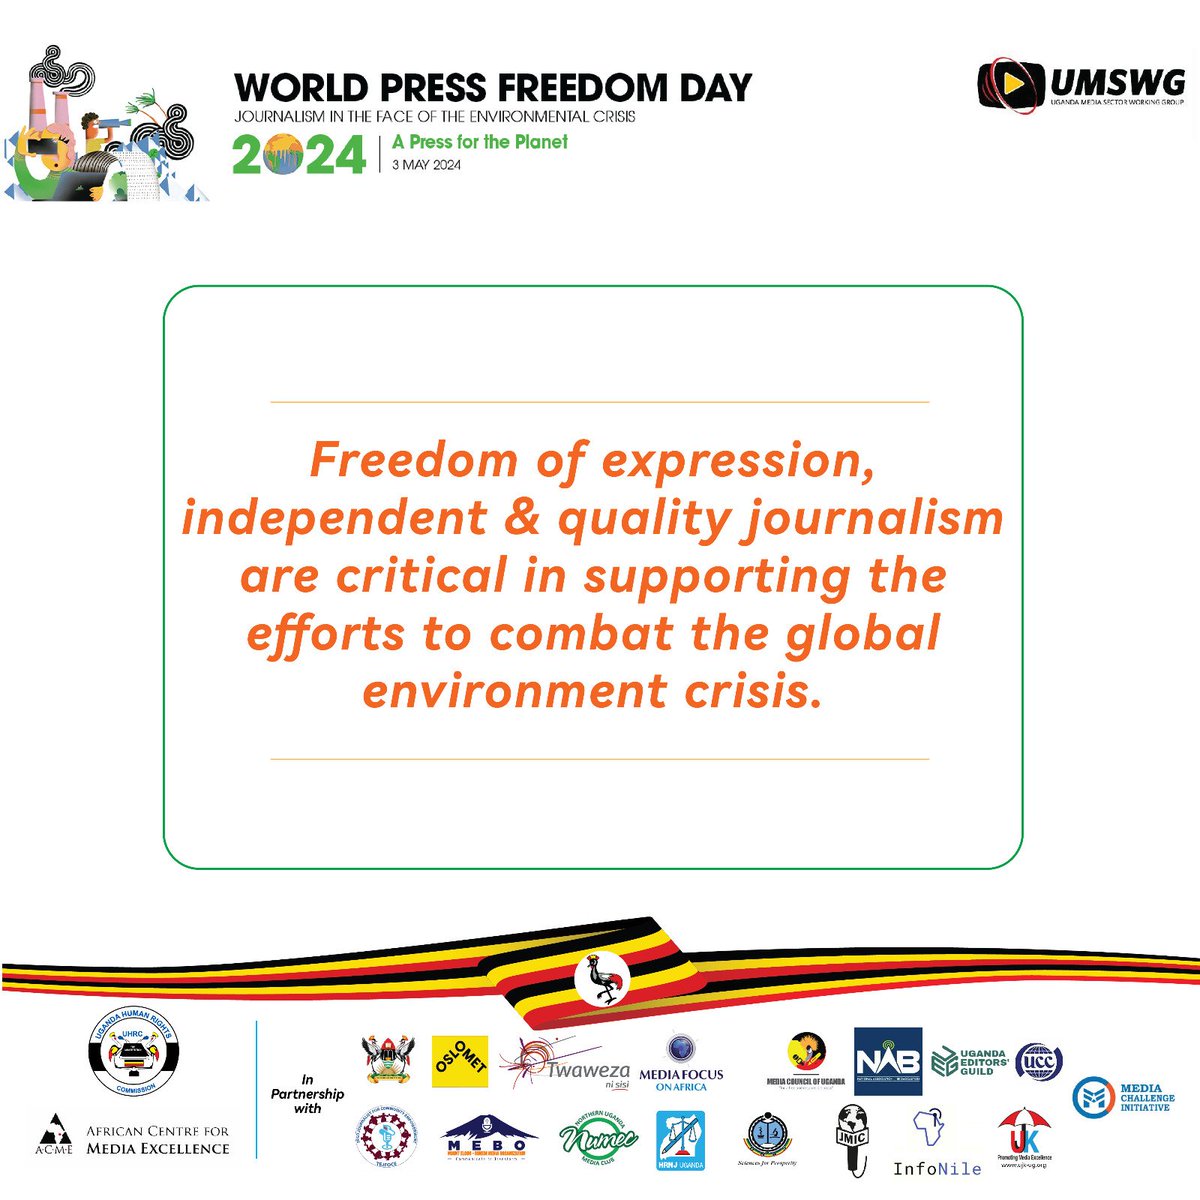 Press Freedom is not just a right but a cornerstone of our societies,empowering voices, exposing truths, and shaping our understanding of the world. #WorldPressFreedomDay #WPFD2024UG